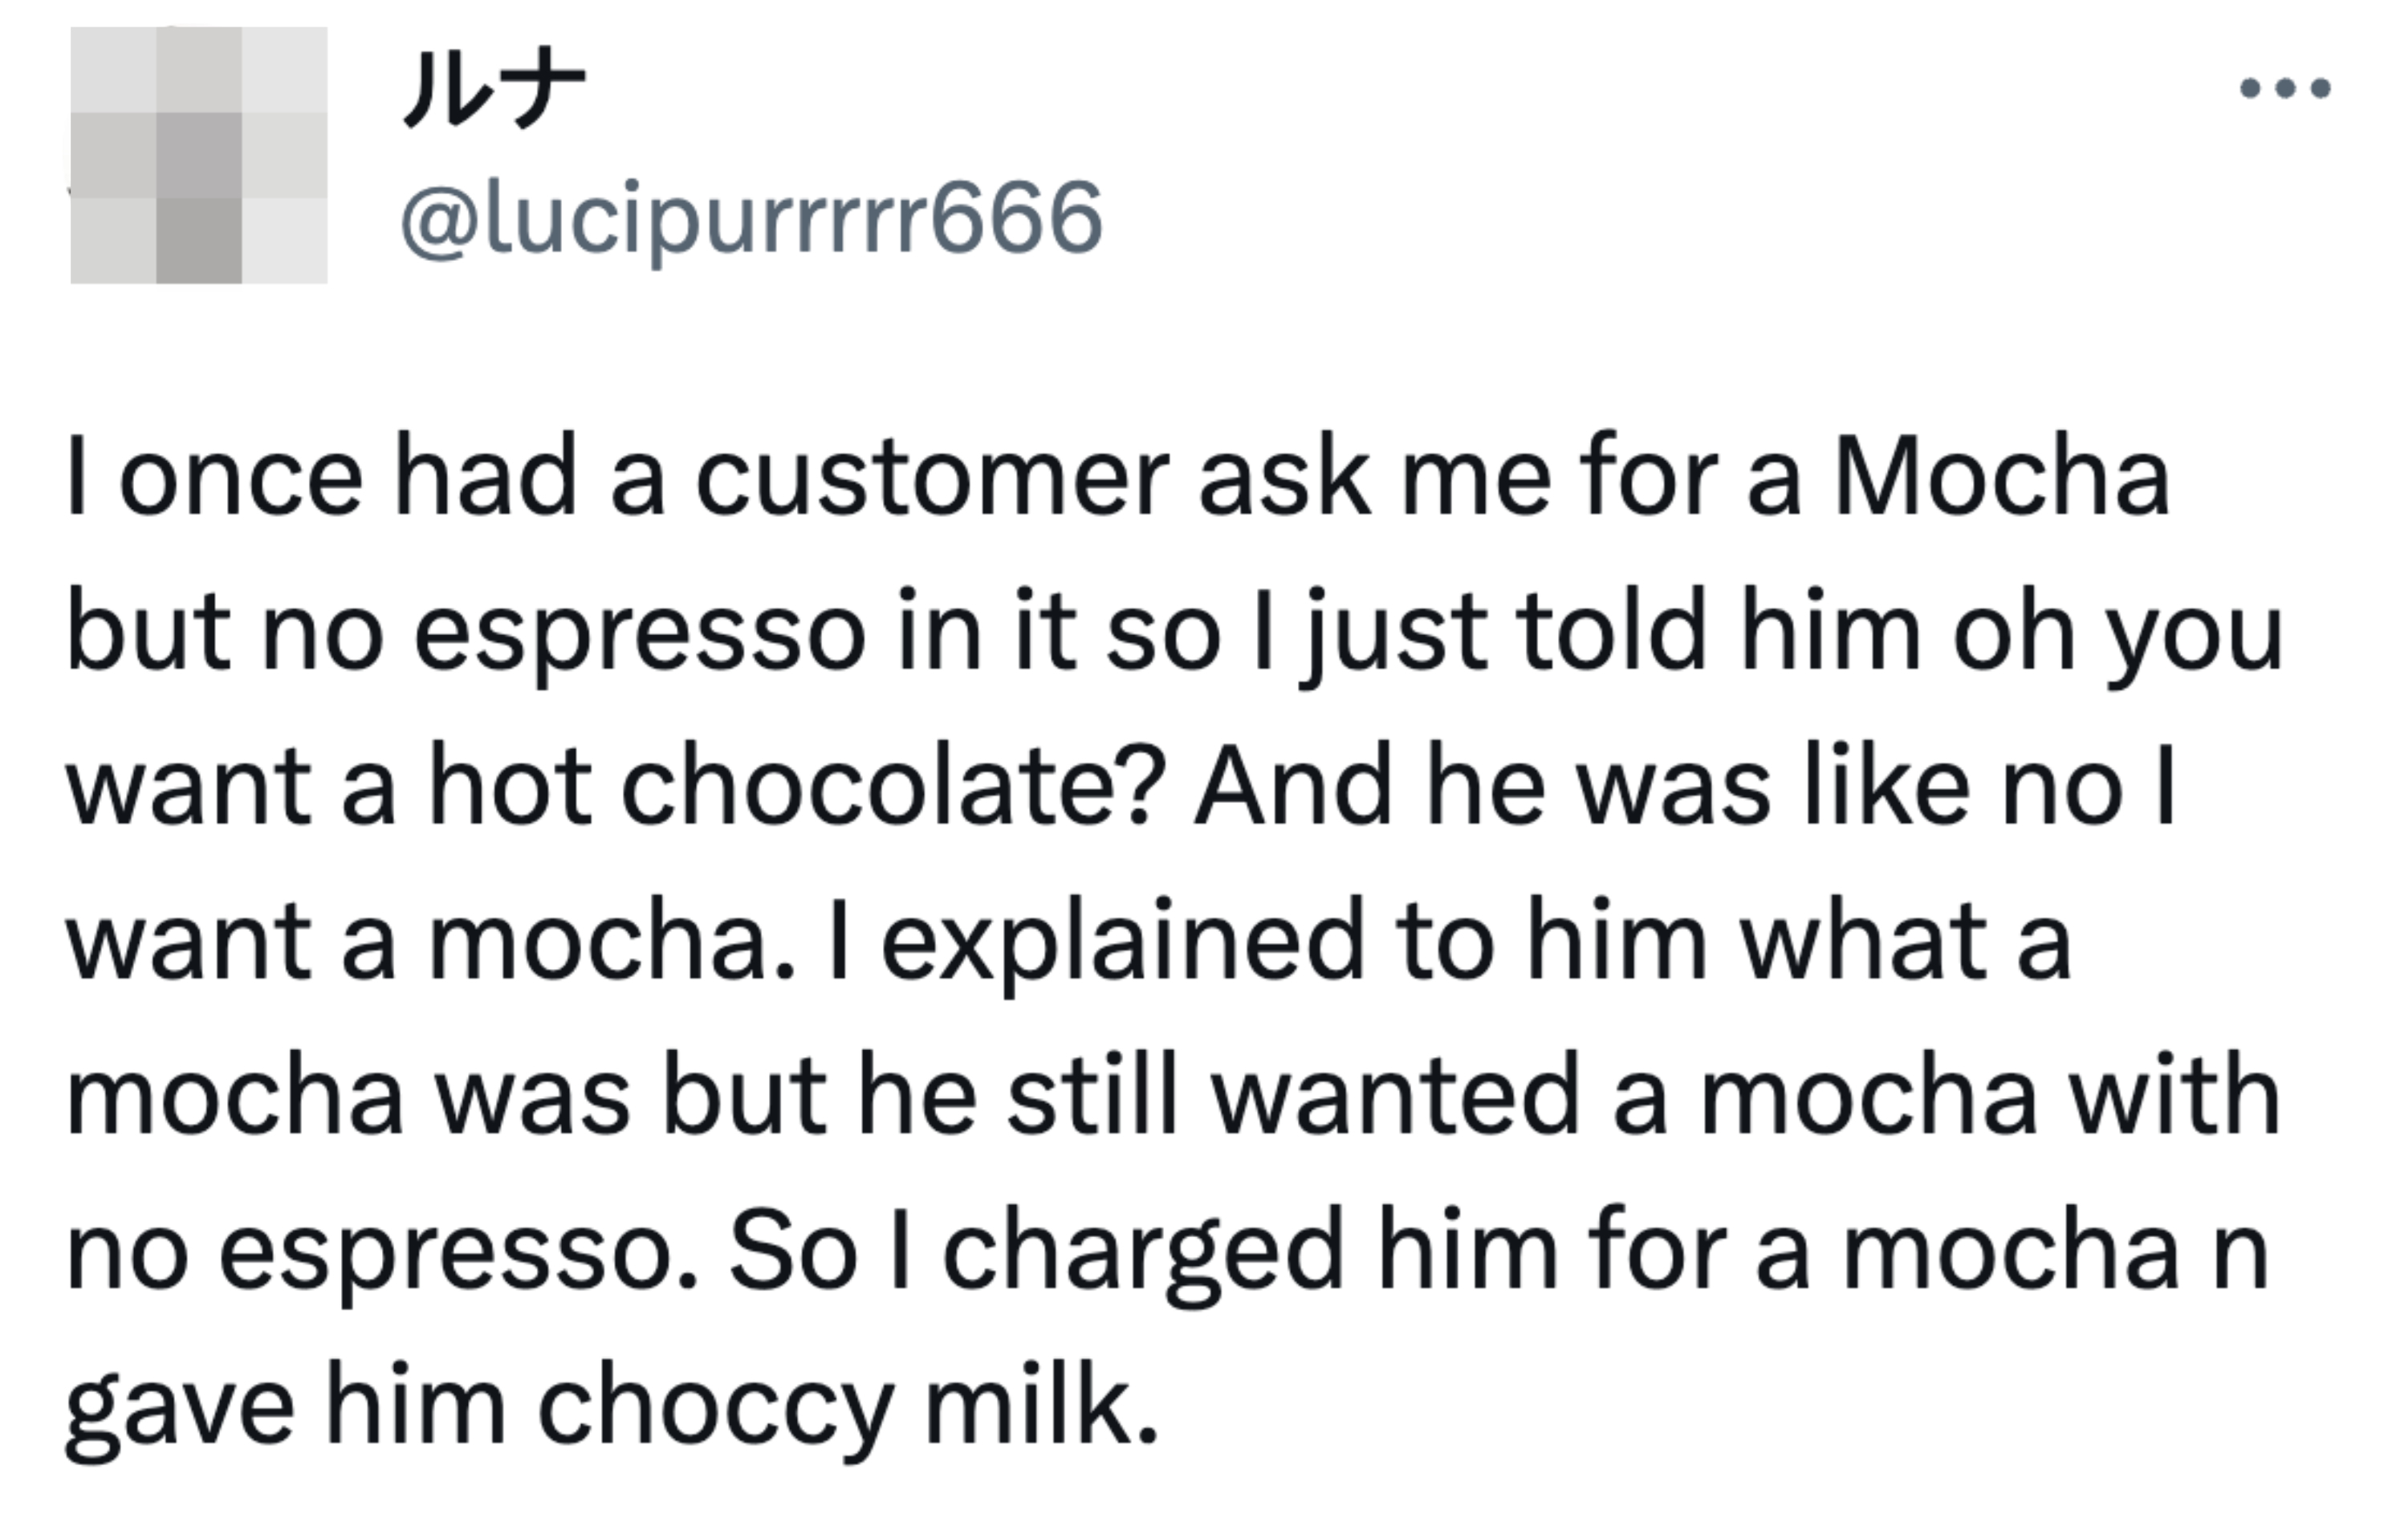 &quot;And he was like no I want a mocha.&quot;